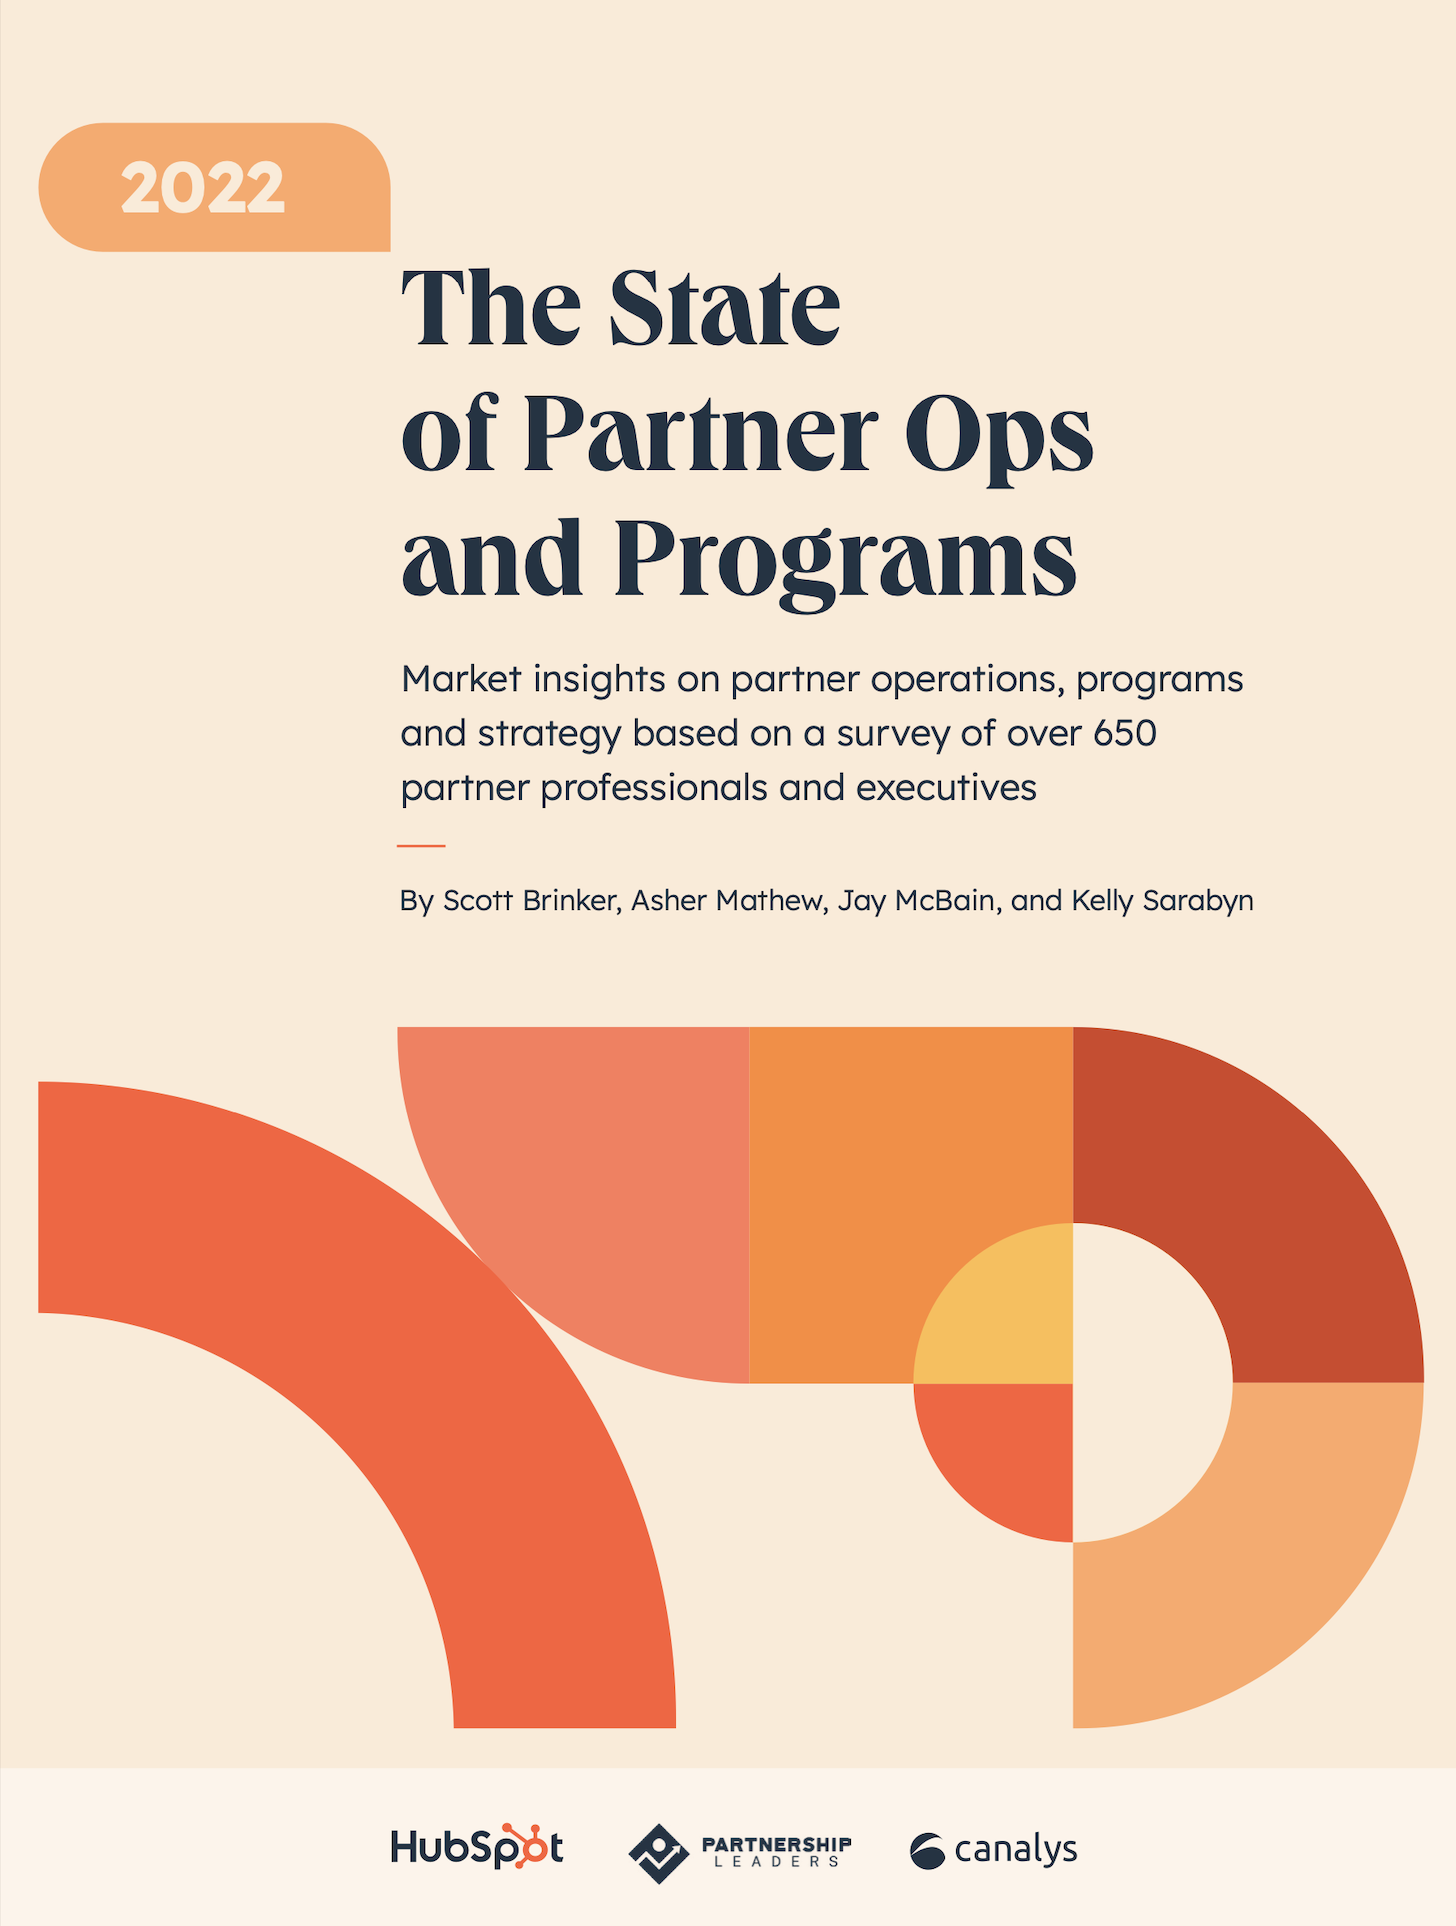 Partner Ops: The forgotten ops that’s suddenly thriving in the ecosystem era